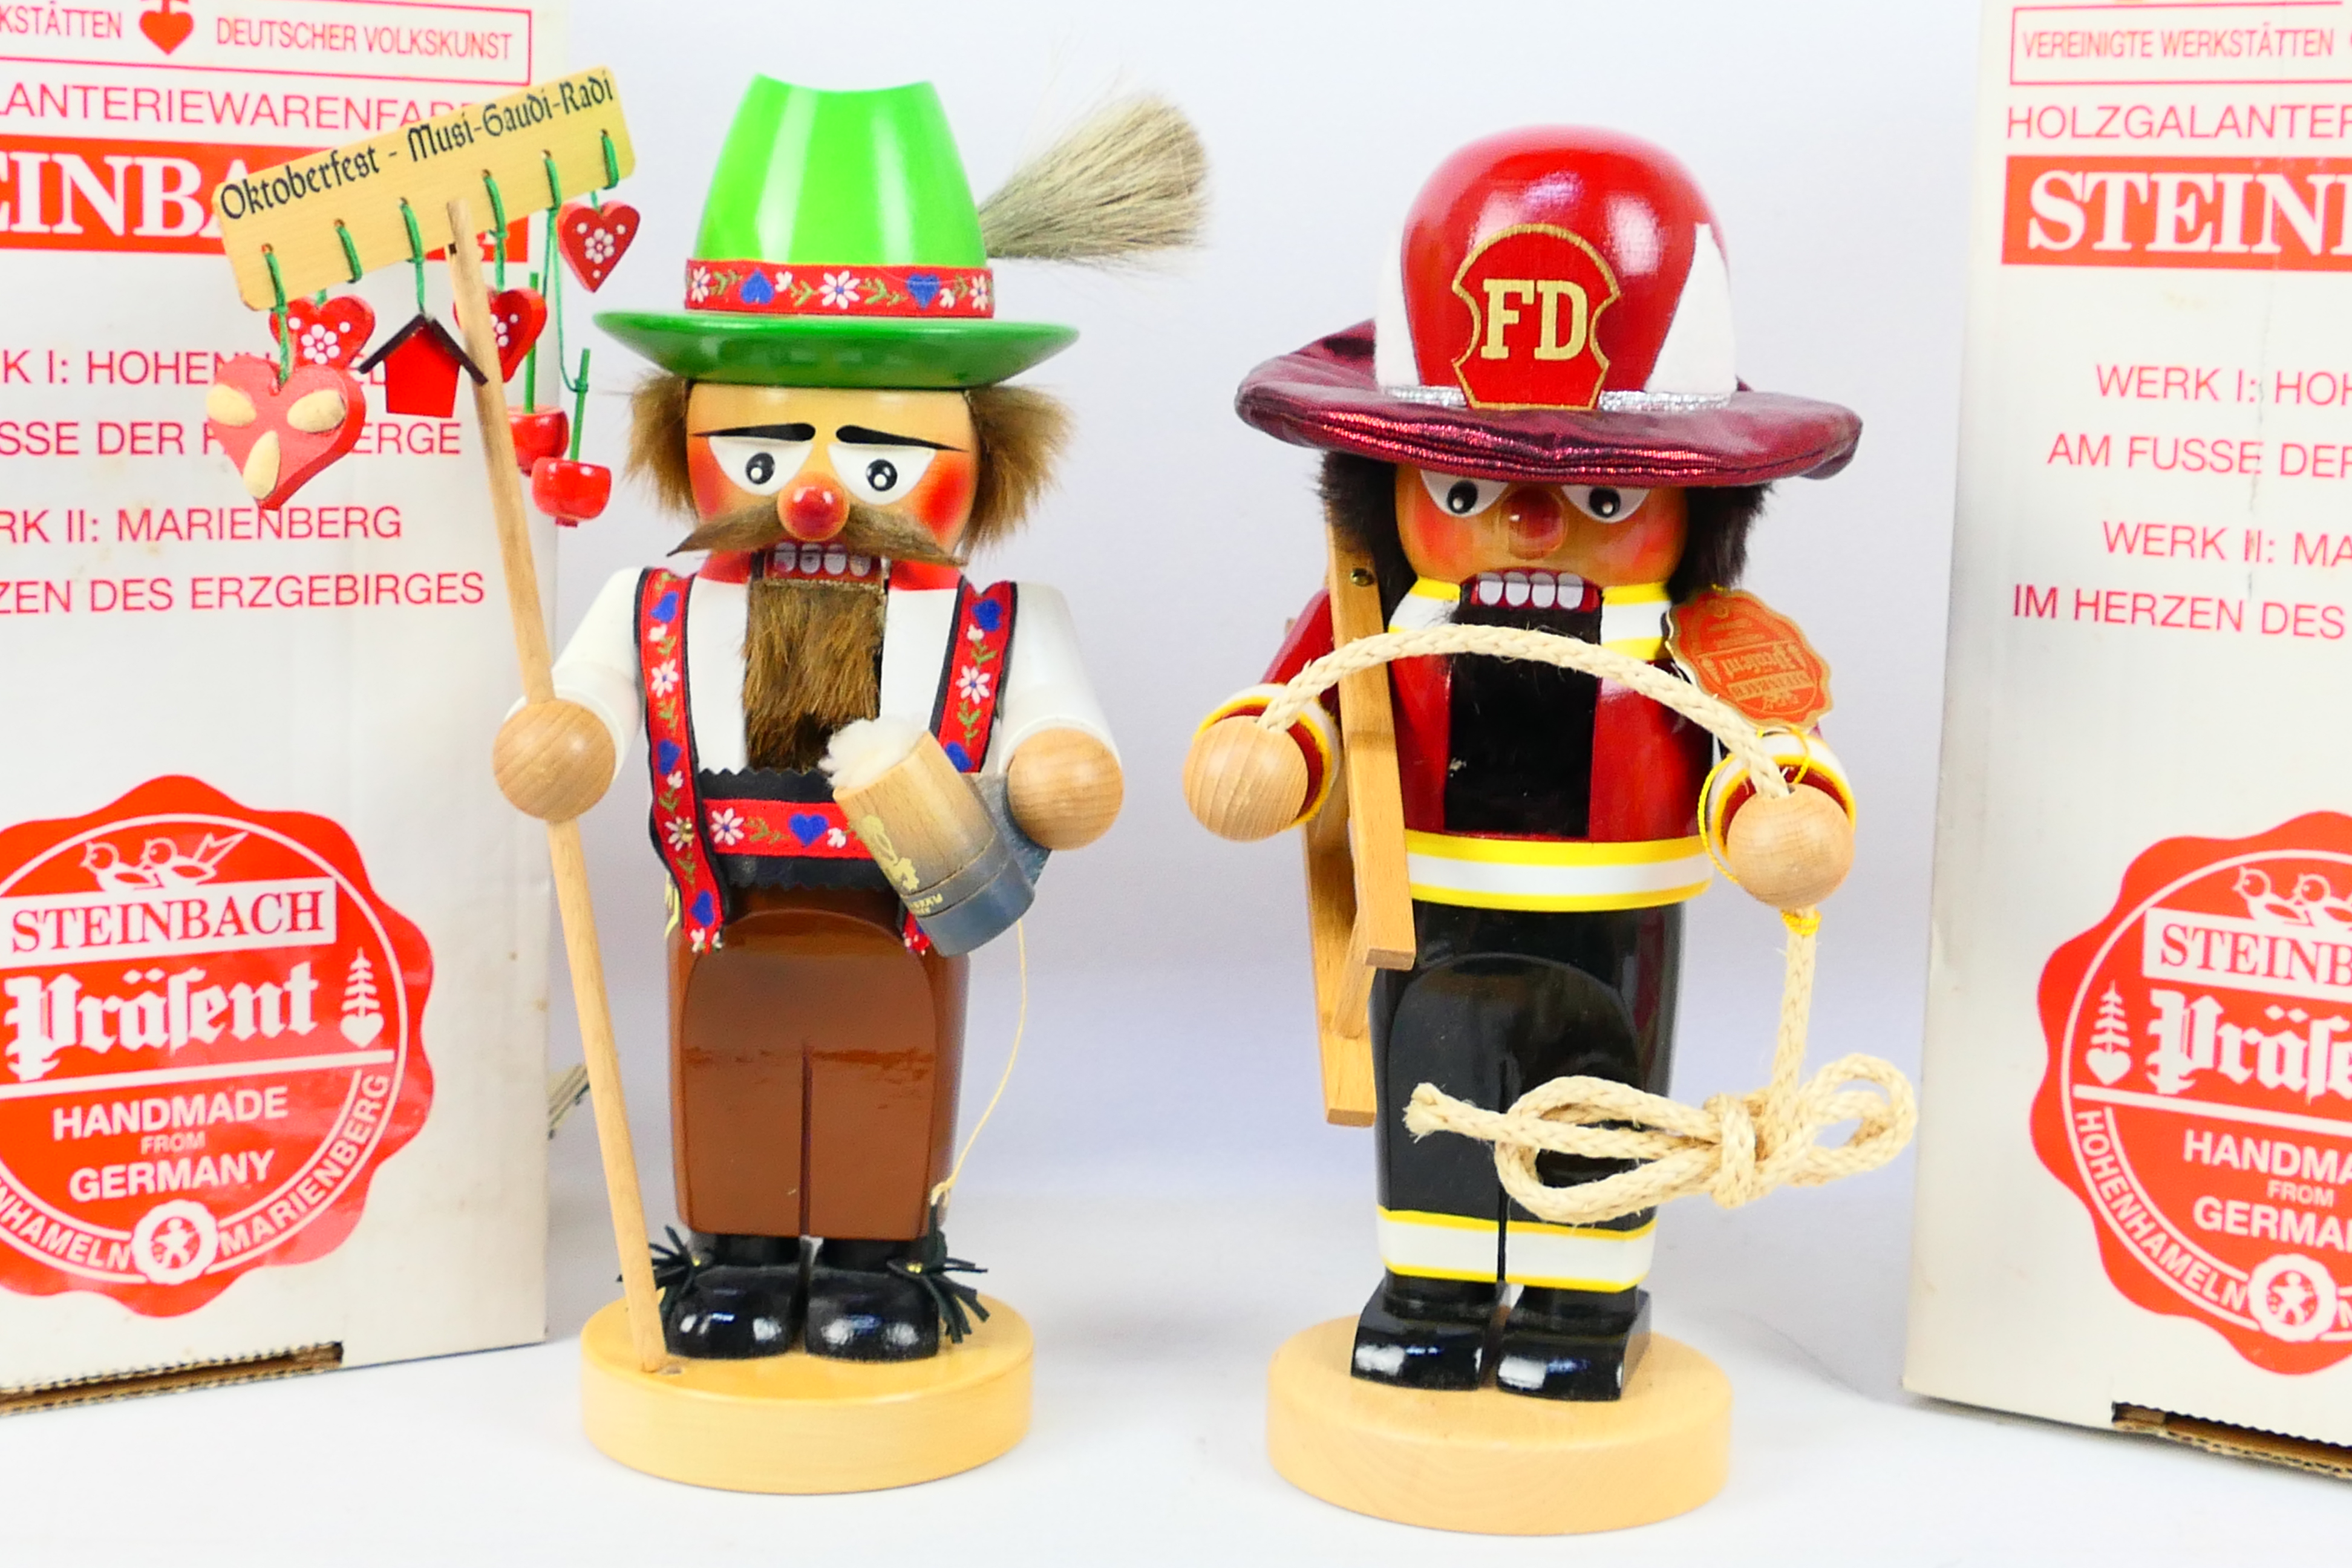 Two traditional German handmade wooden figural nutcrackers by Steinbach, - Image 2 of 3